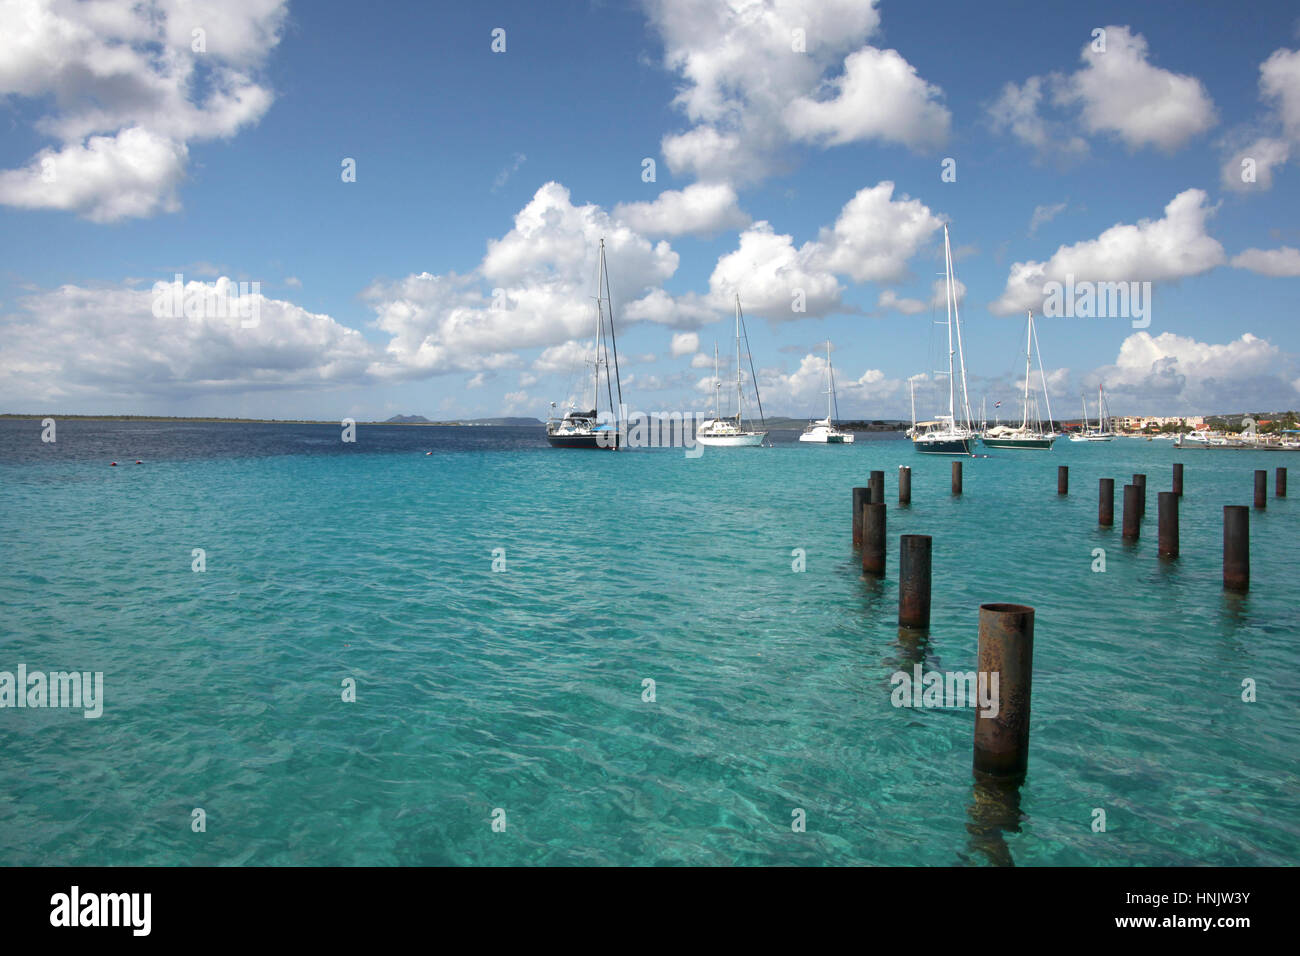 Beautiful harbor of Kralendijk with turquoise water & blue sky. The city is in the background & little boats mored out to sea, Bonaire, Caribbean. Stock Photo